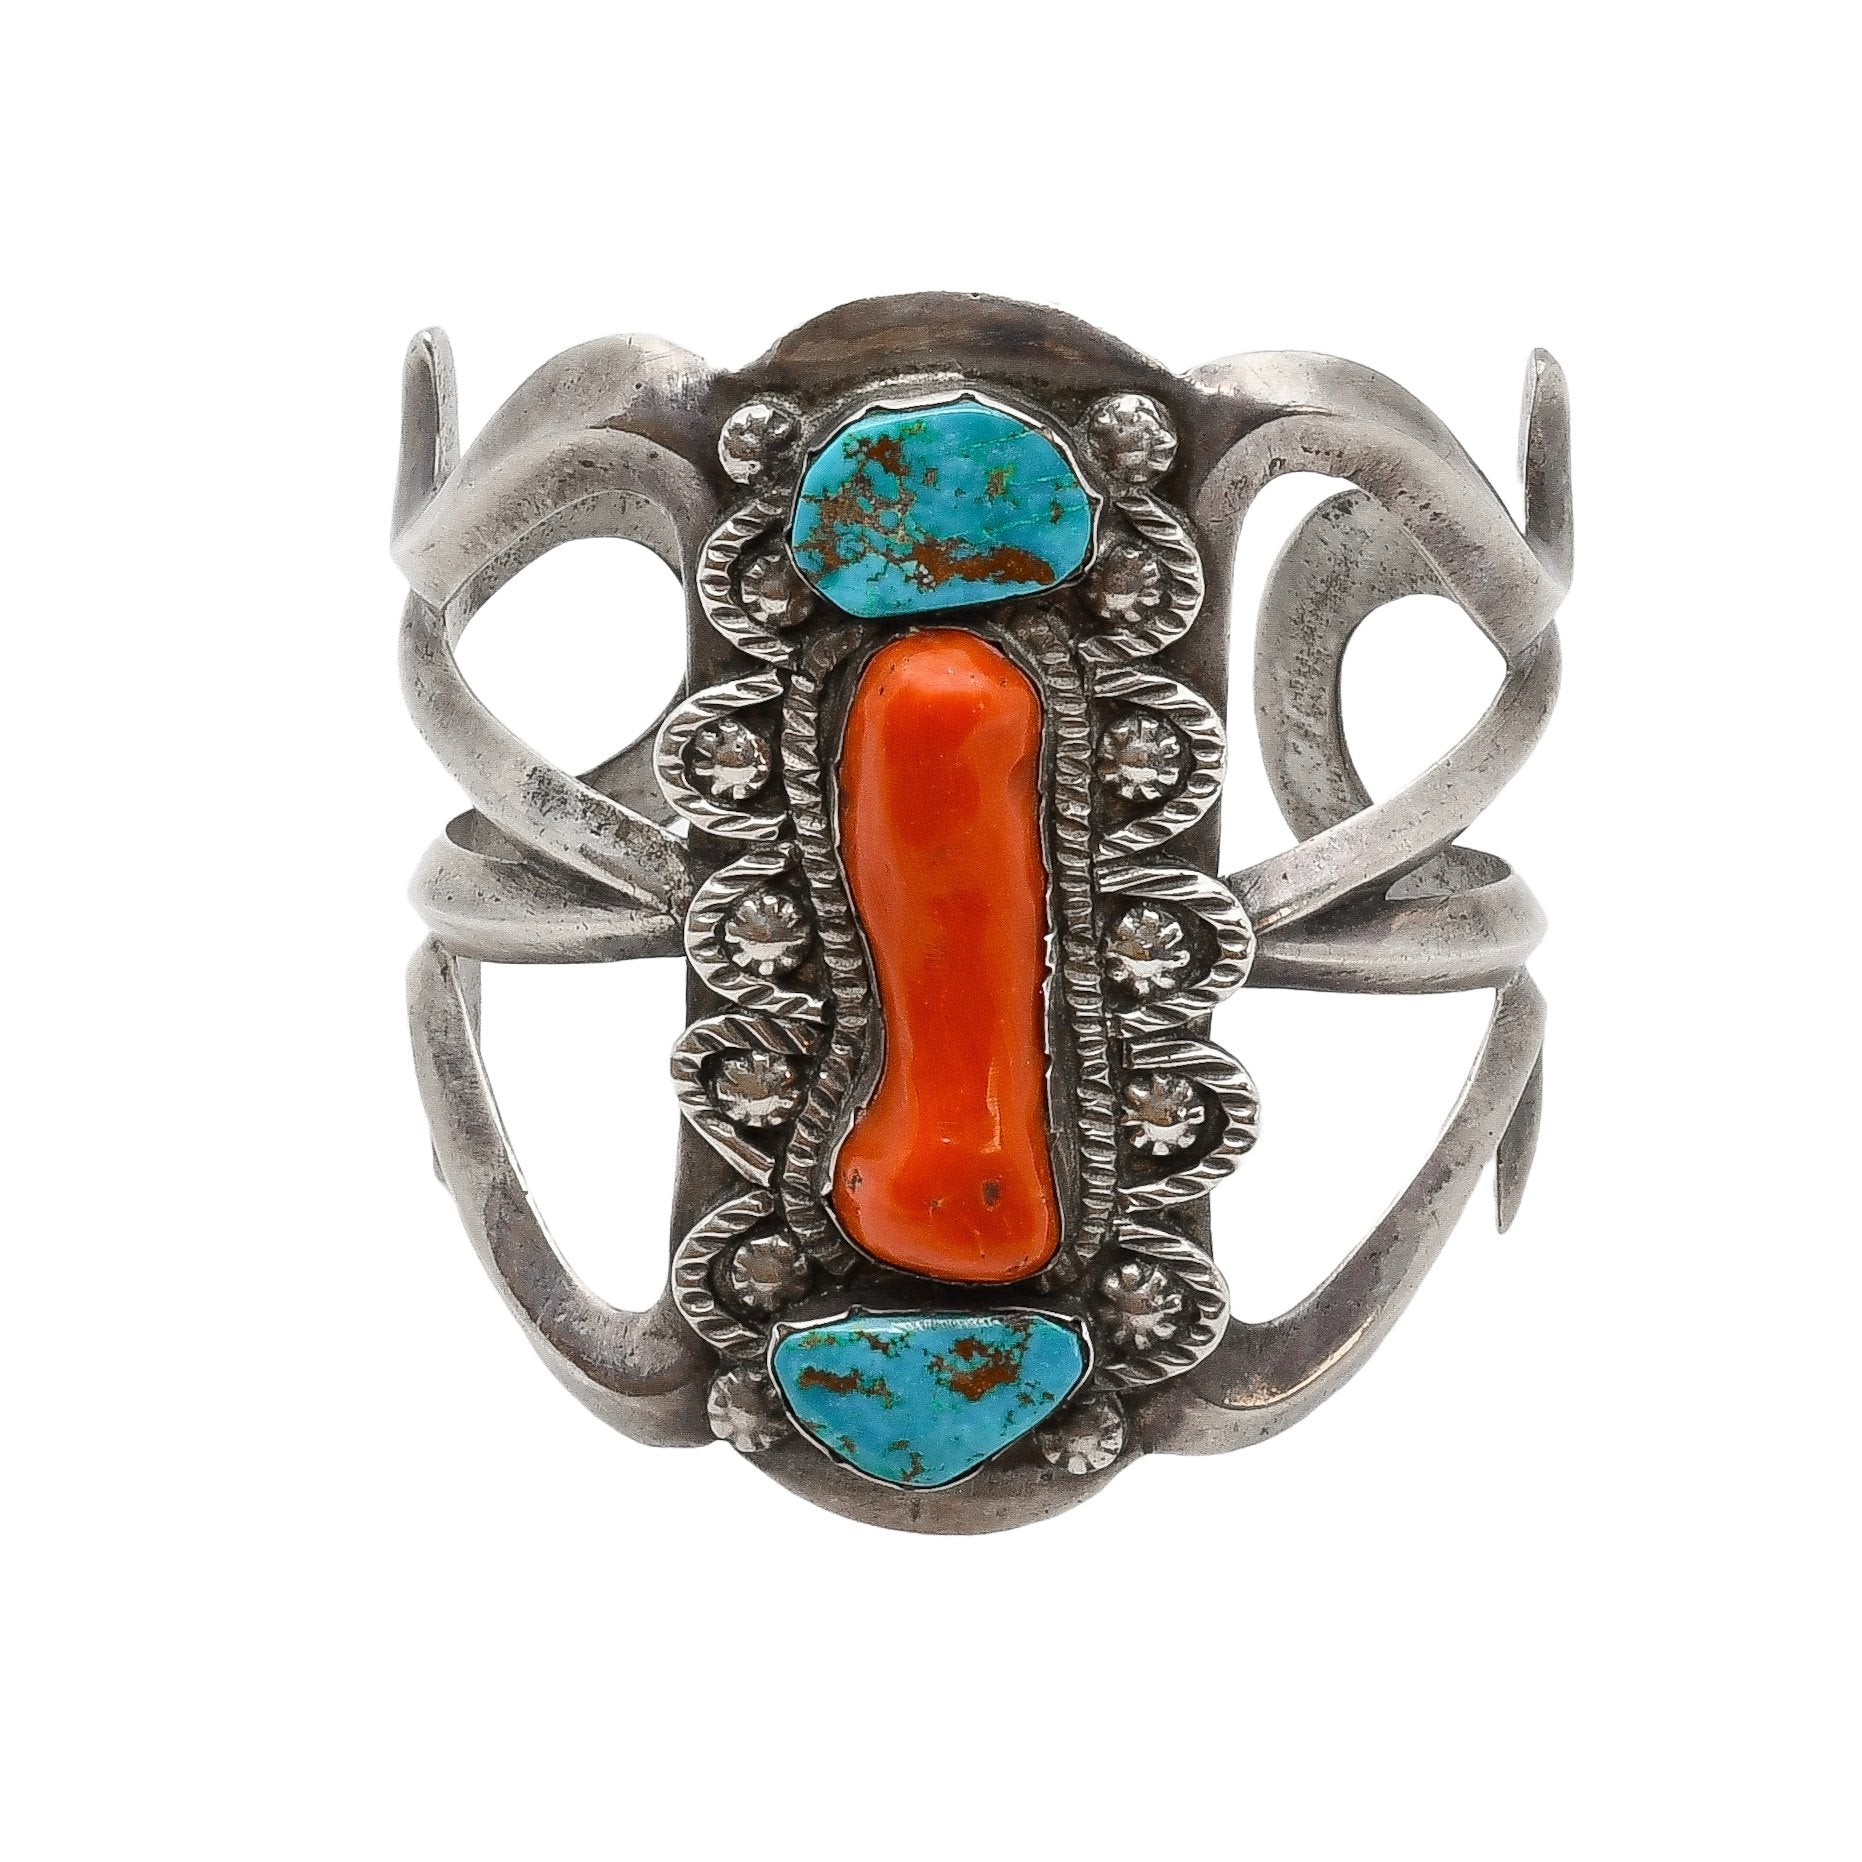 Vintage Wide Tufa Cast Navajo Bracelet With Turquoise and Coral - Turquoise & Tufa